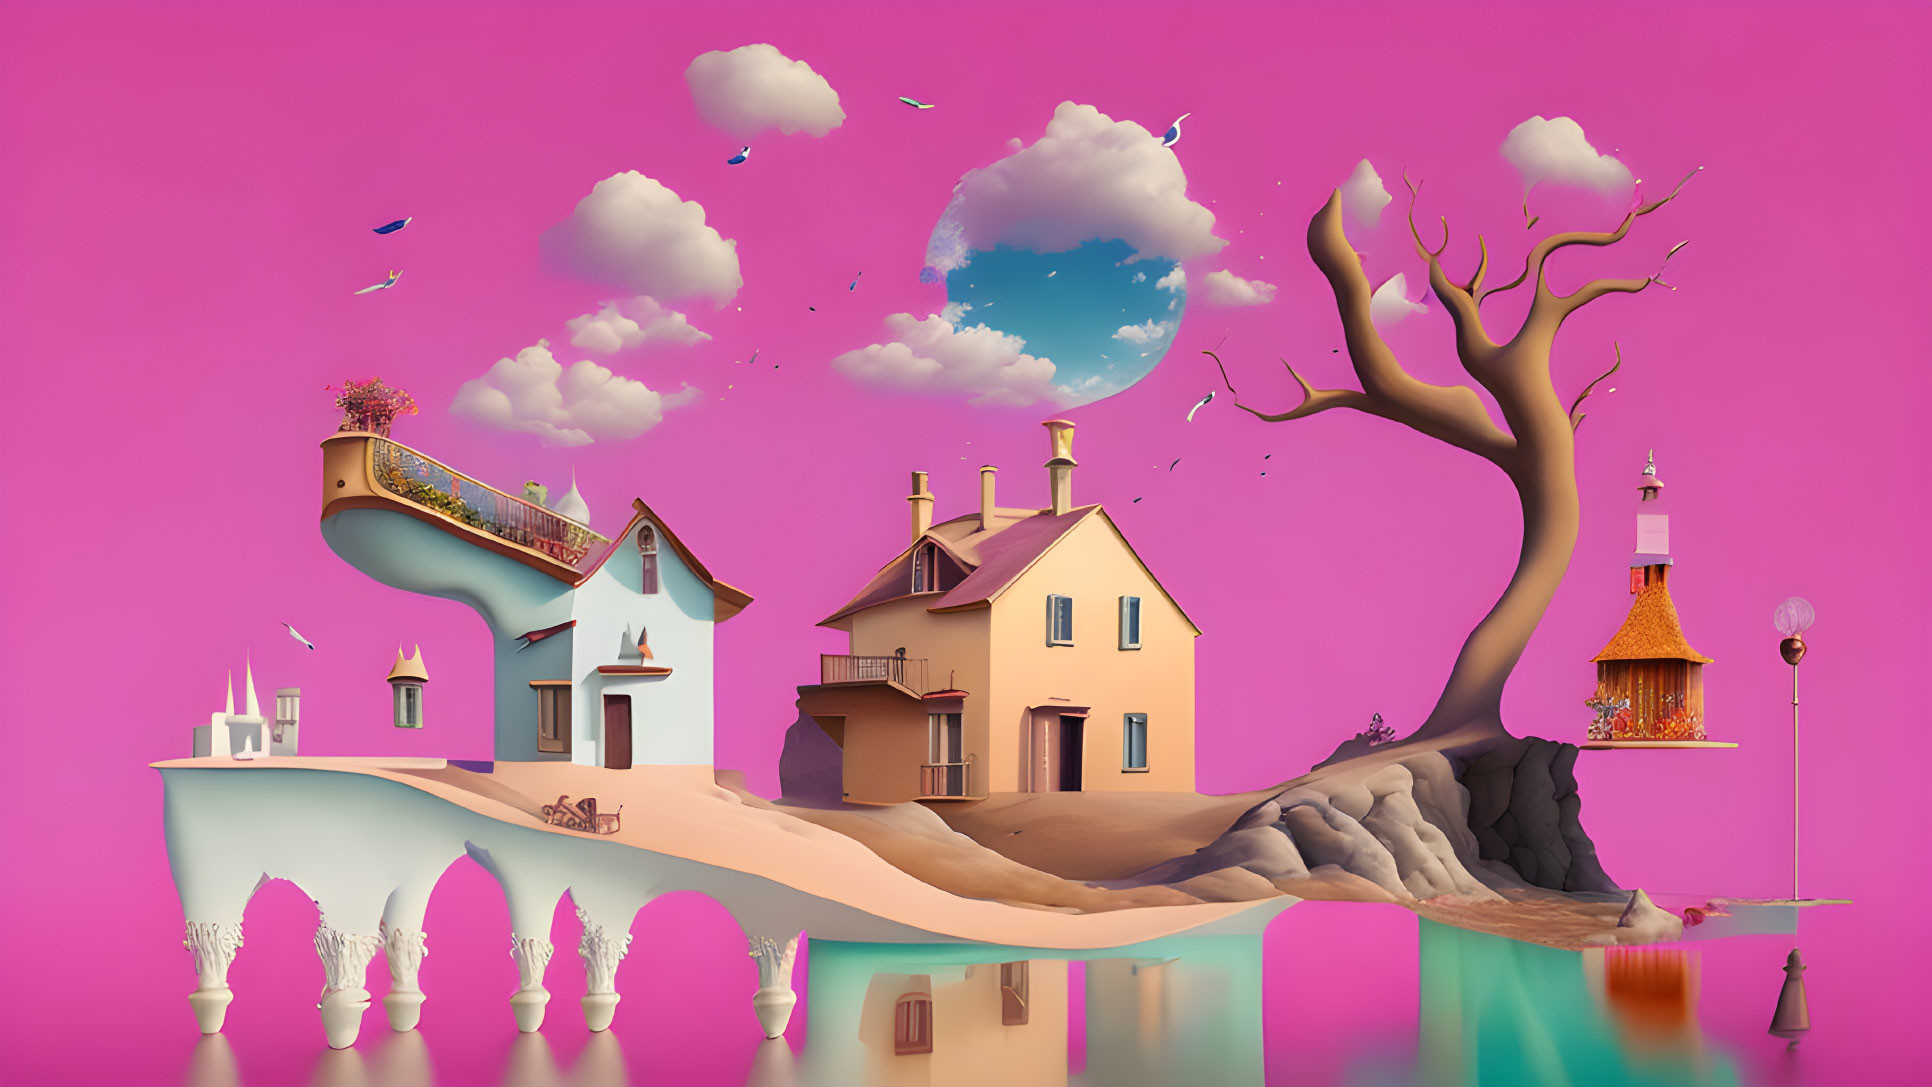 Whimsical floating island houses with surreal tree and pink sky reflection